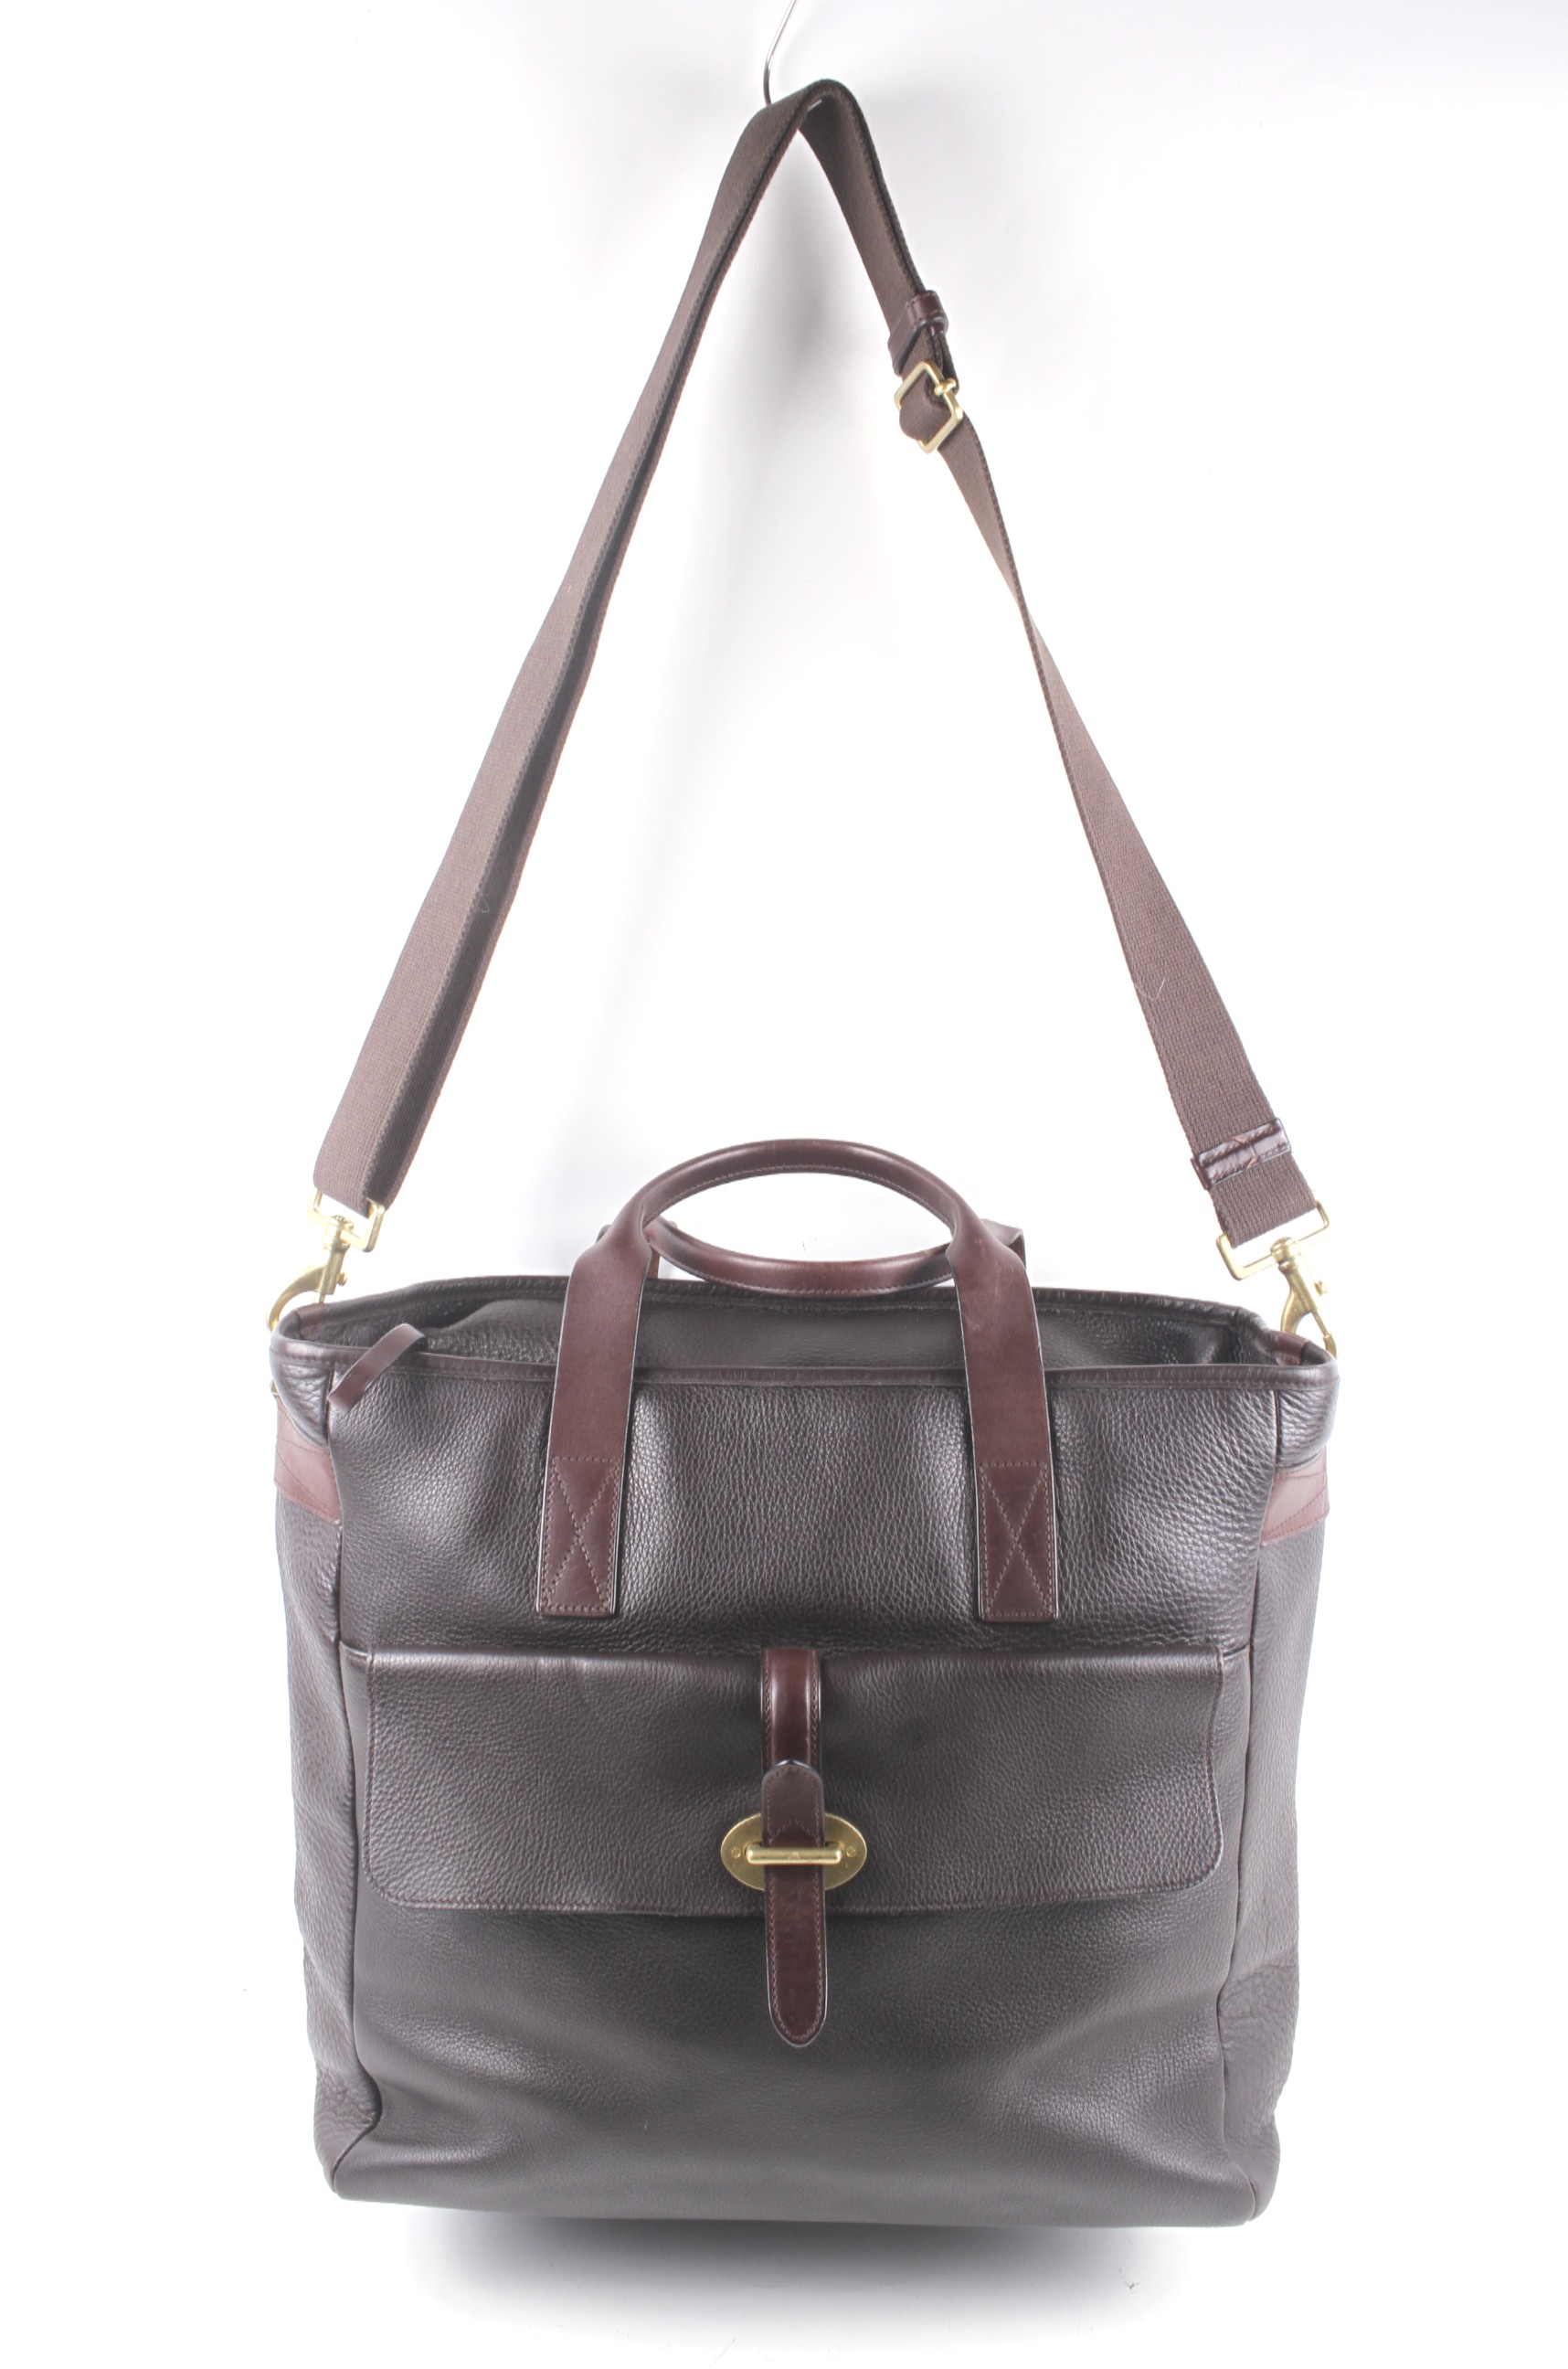 A Mulberry grained brown leather shoulder bag.